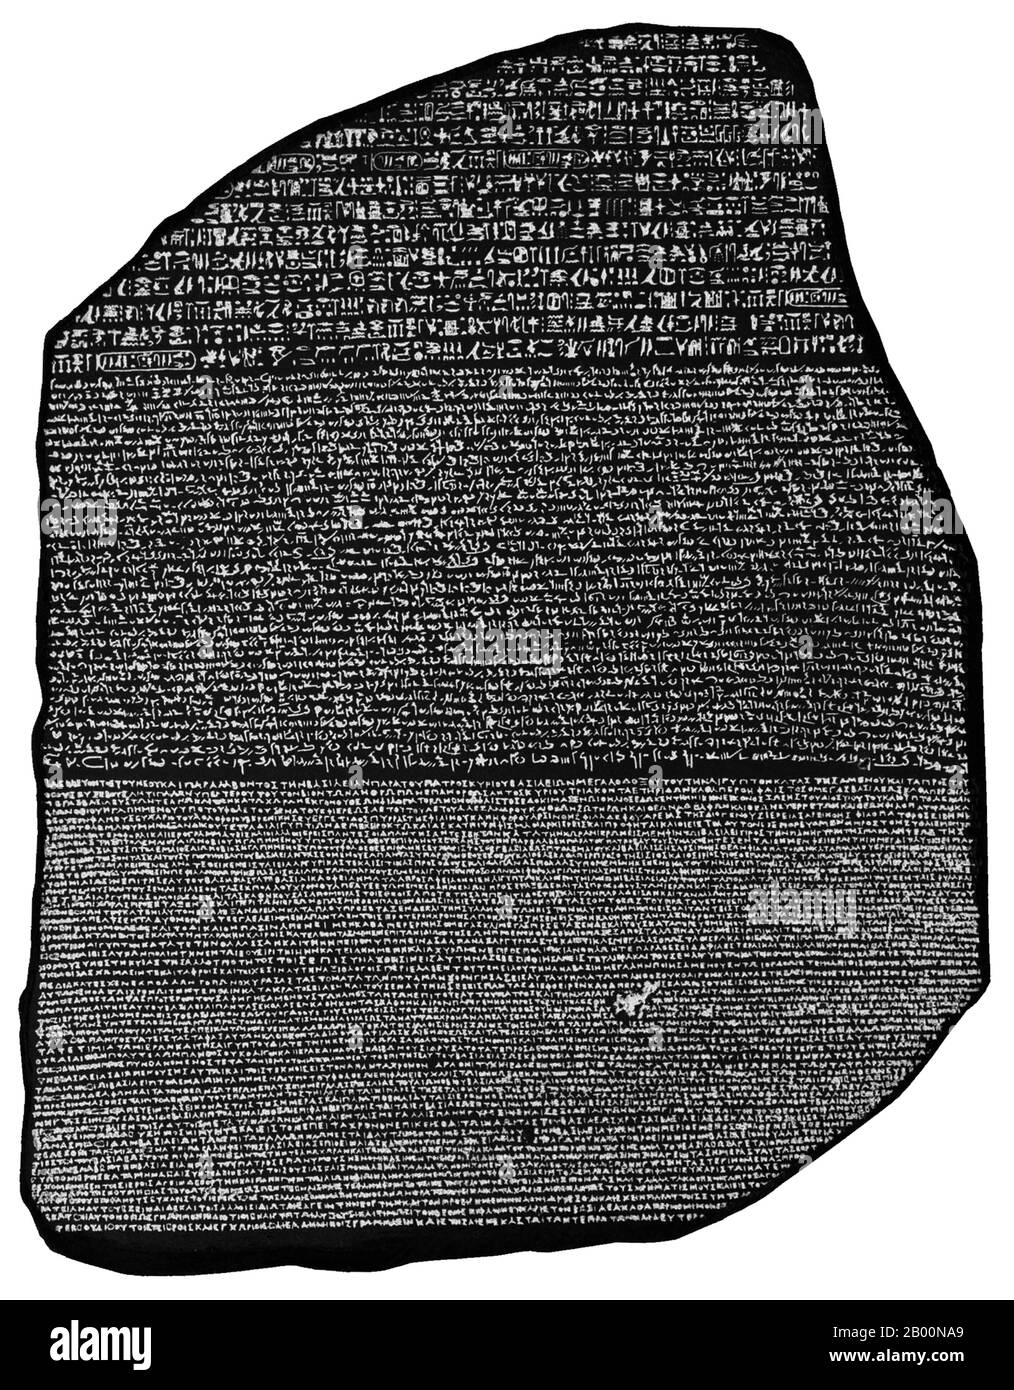 Egypt: The Rosetta Stone is an Ancient Egyptian artifact which provided the key to modern understanding of Egyptian hieroglyphs. Created at the behest of King Ptolemy V Epiphanes (204-180 BCE).  The Rosetta Stone is a fragment of a larger granodiorite stele, with an inscription recording a decree that was issued at Memphis in 196 BCE. No additional fragments were found in later searches of the Rosetta site. Owing to its damaged state, none of the three texts is absolutely complete. The Greek text contains 54 lines, of which the first 27 survive in full; the rest are increasingly fragmentary. Stock Photo